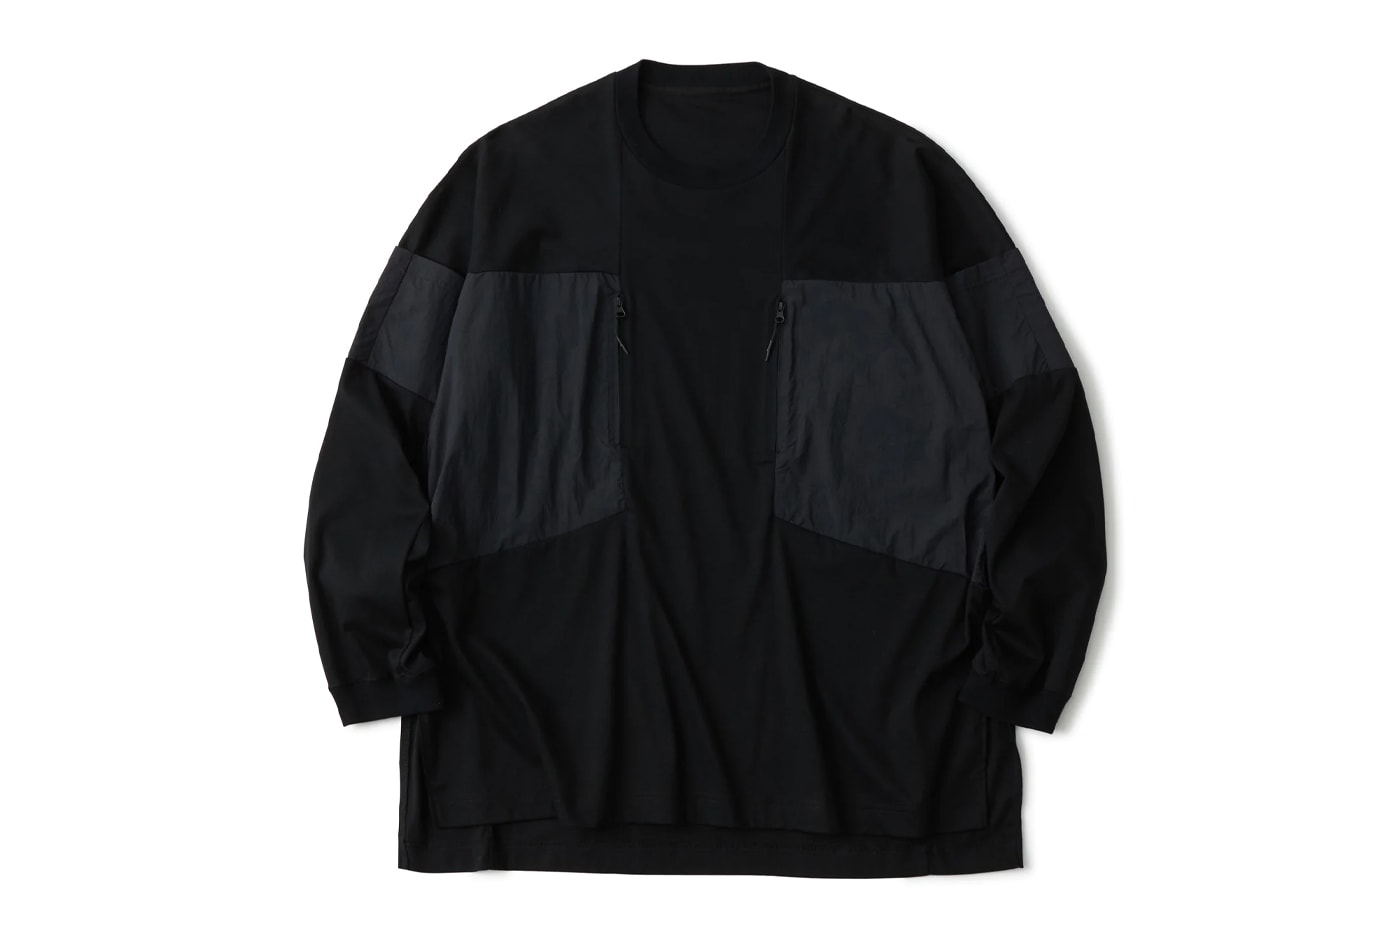 White Mountaineering BLK Collection Release Info